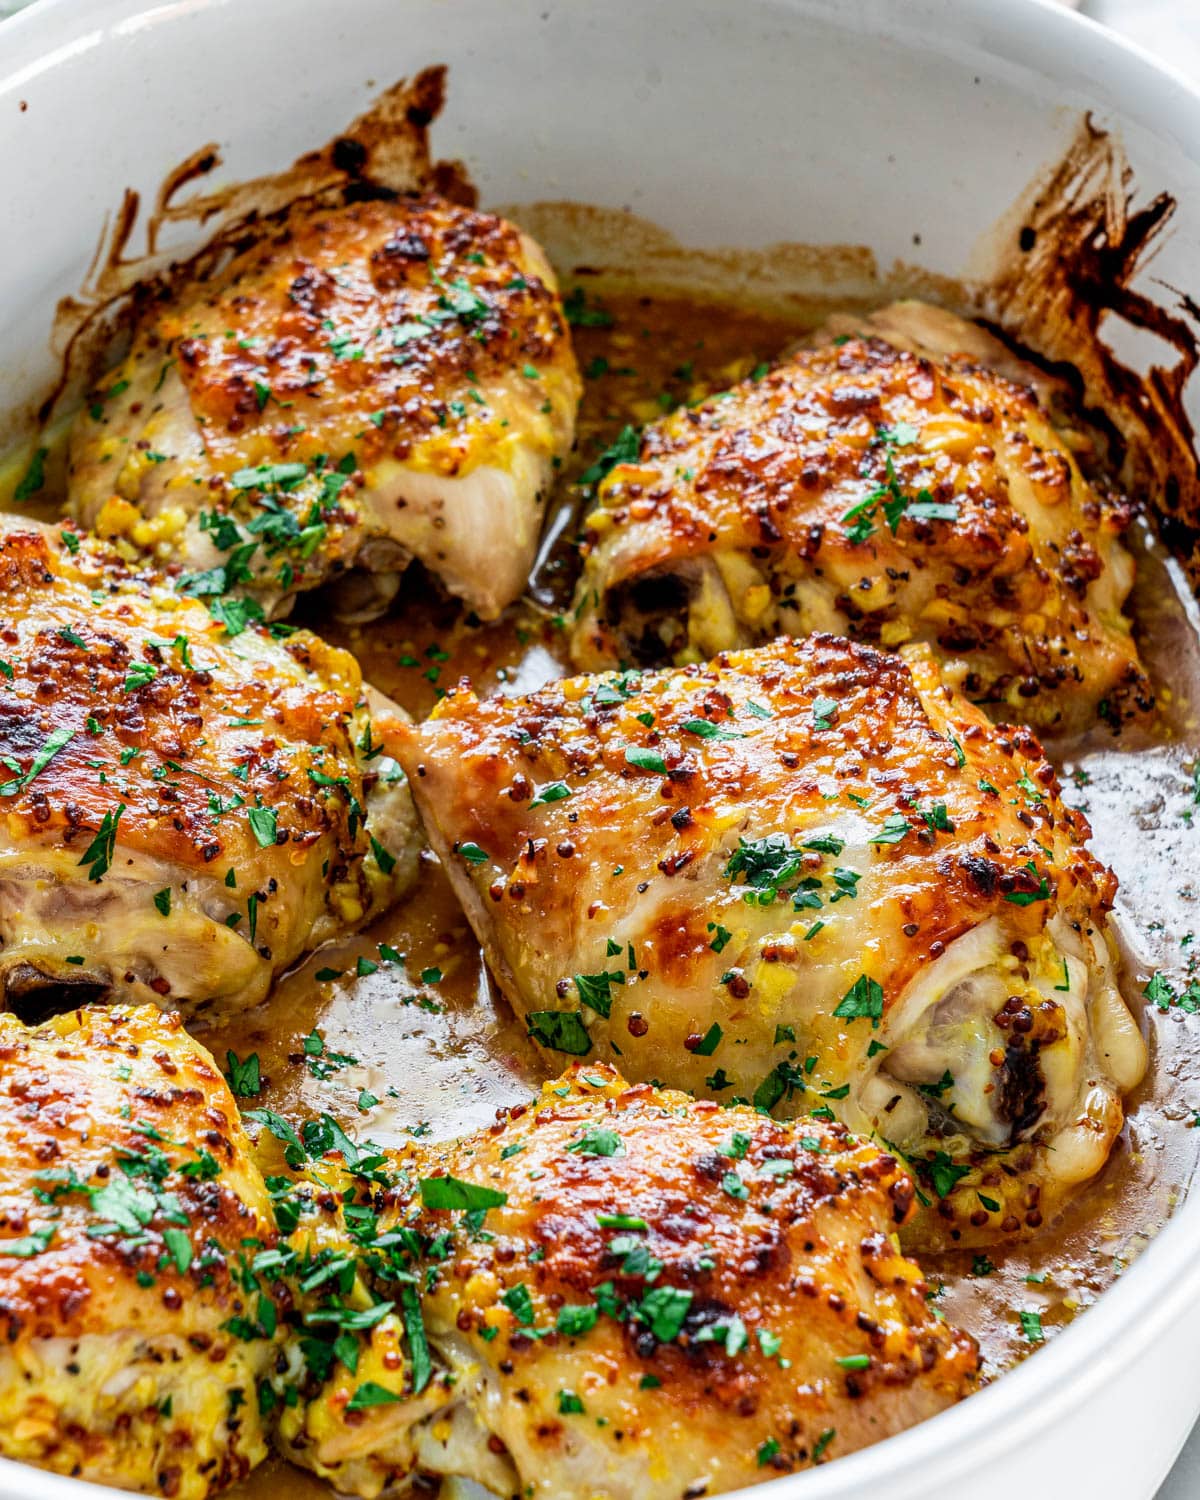 How Long To Cook Chicken Thighs In Oven At 325